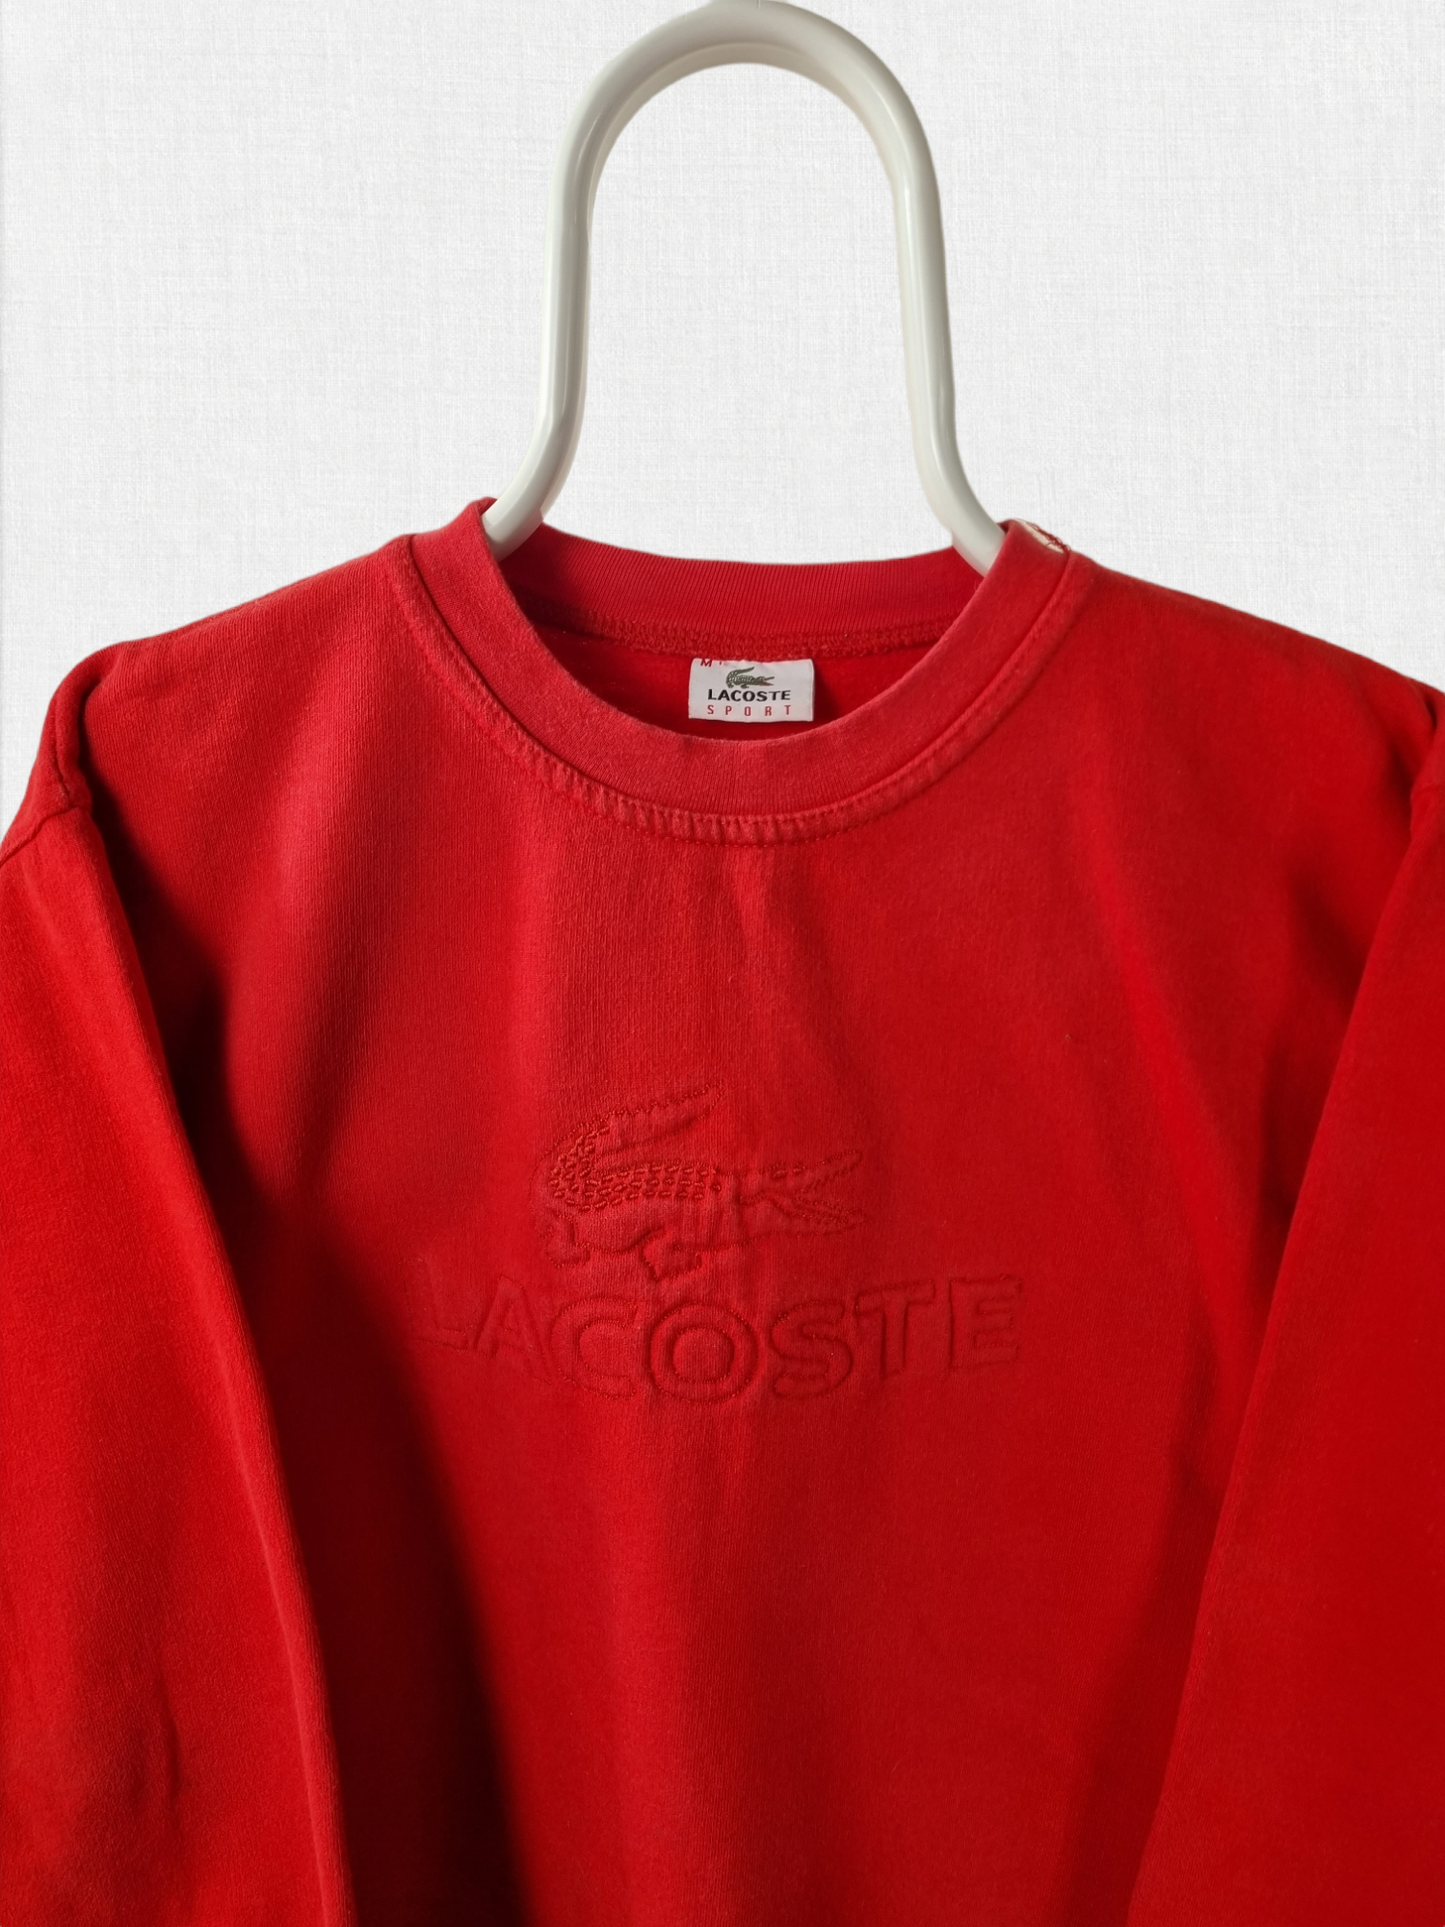 Lacoste sweater maat M